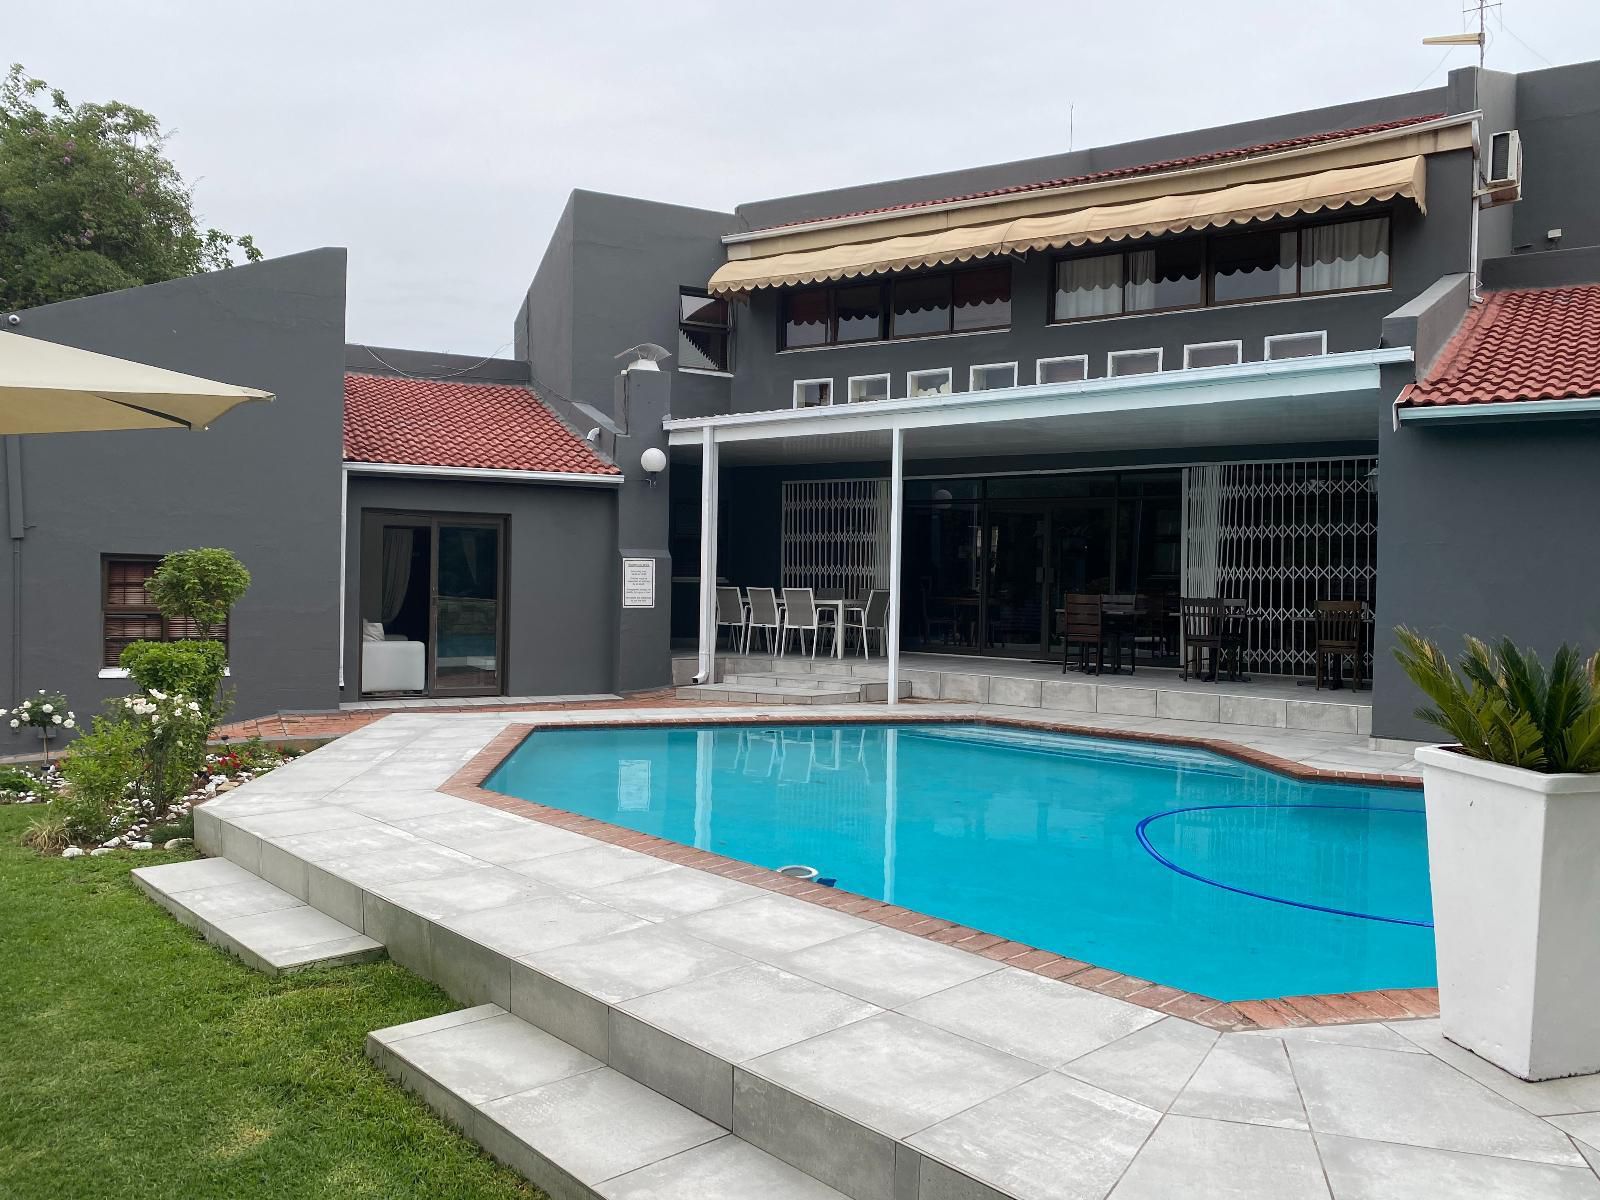 Marion Lodge Sandown Johannesburg Gauteng South Africa House, Building, Architecture, Swimming Pool